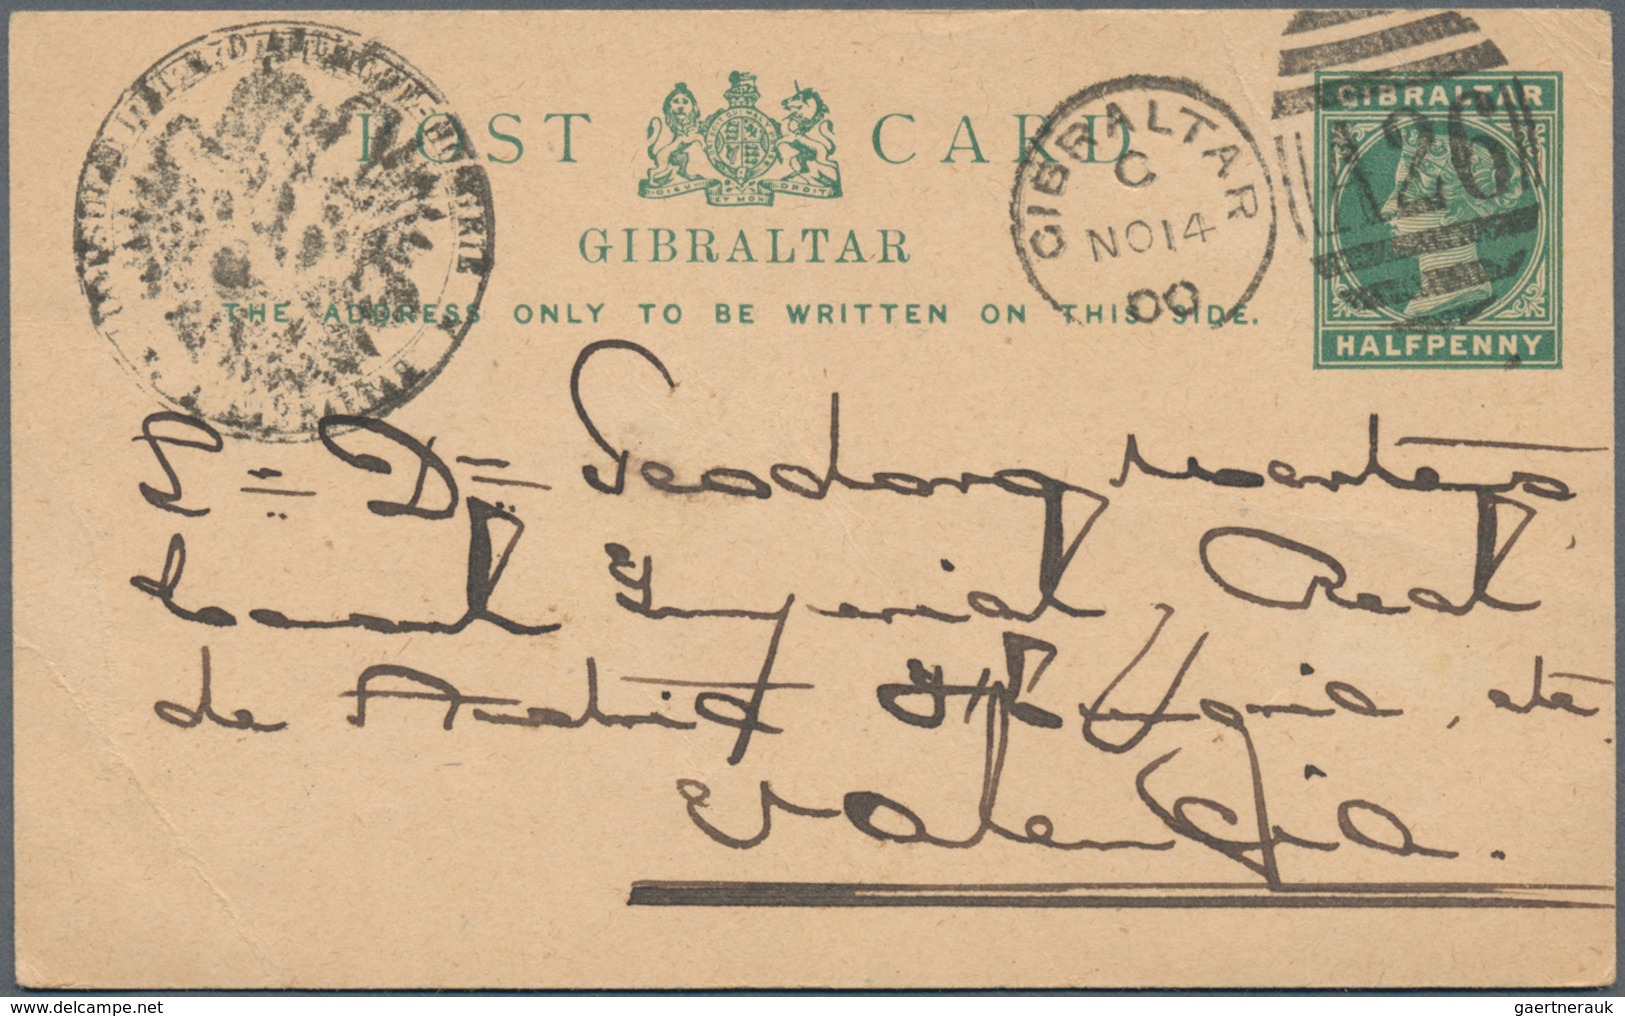 Gibraltar: 1886/1990 ca. 290 unused and a few used postal stationeries, incl. postal stationery post